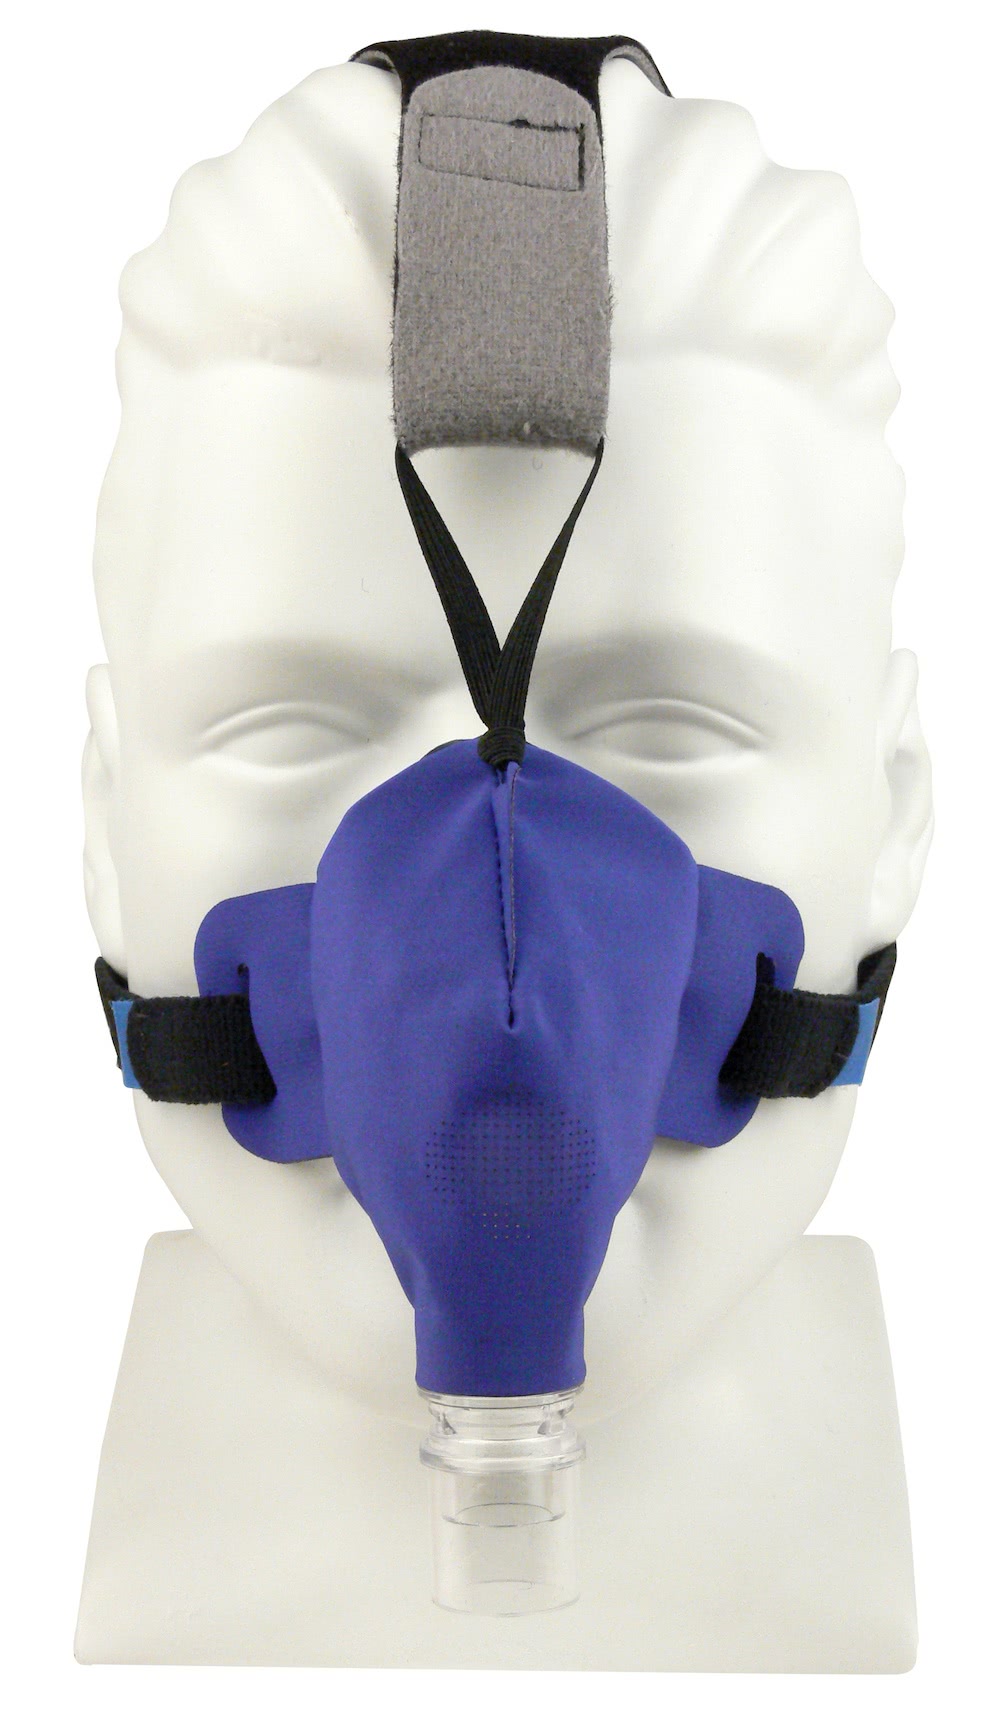 Best CPAP Masks for Beards Reviewed